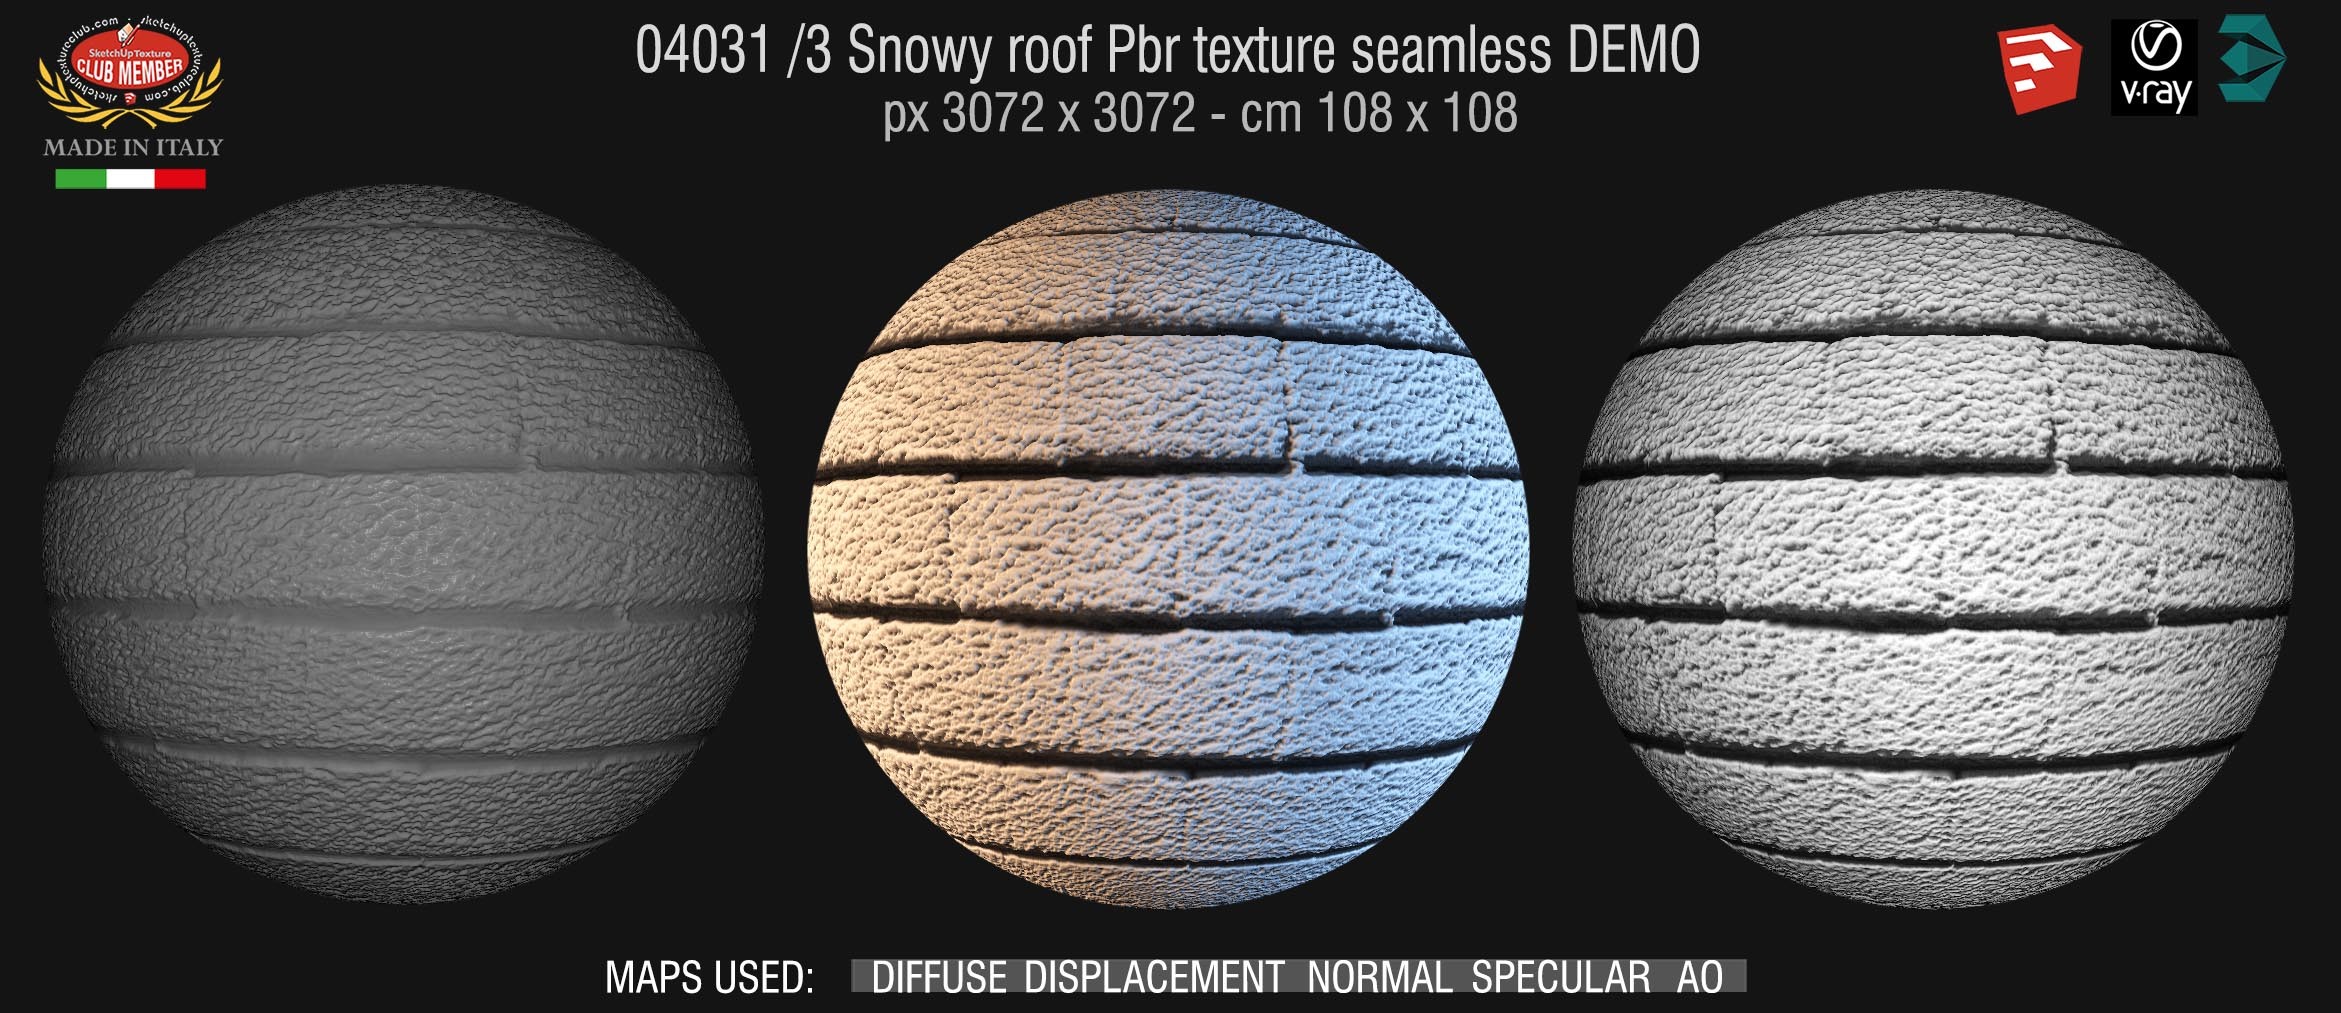 04031/3 Snowy roof Pbr texture seamless DEMO